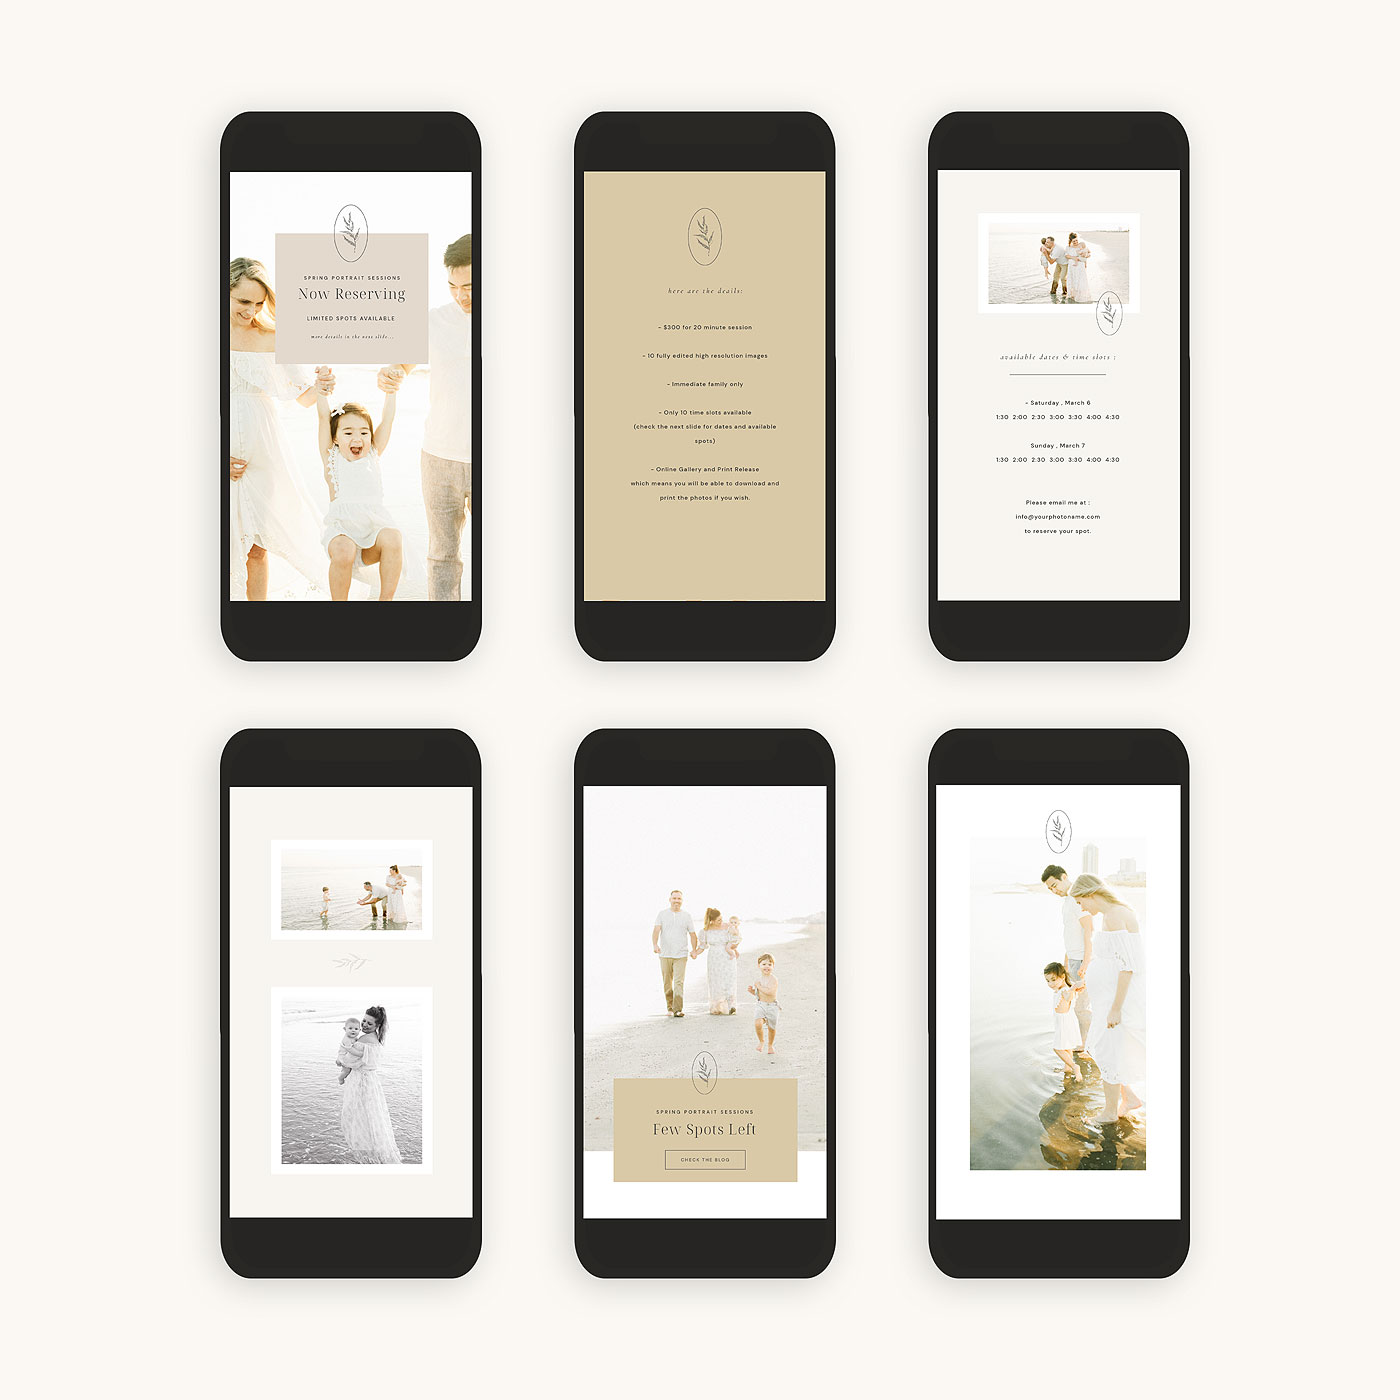 claire-sage-ig-story-templates-designed-for-both-photoshop-canva-oh-snap-boutique